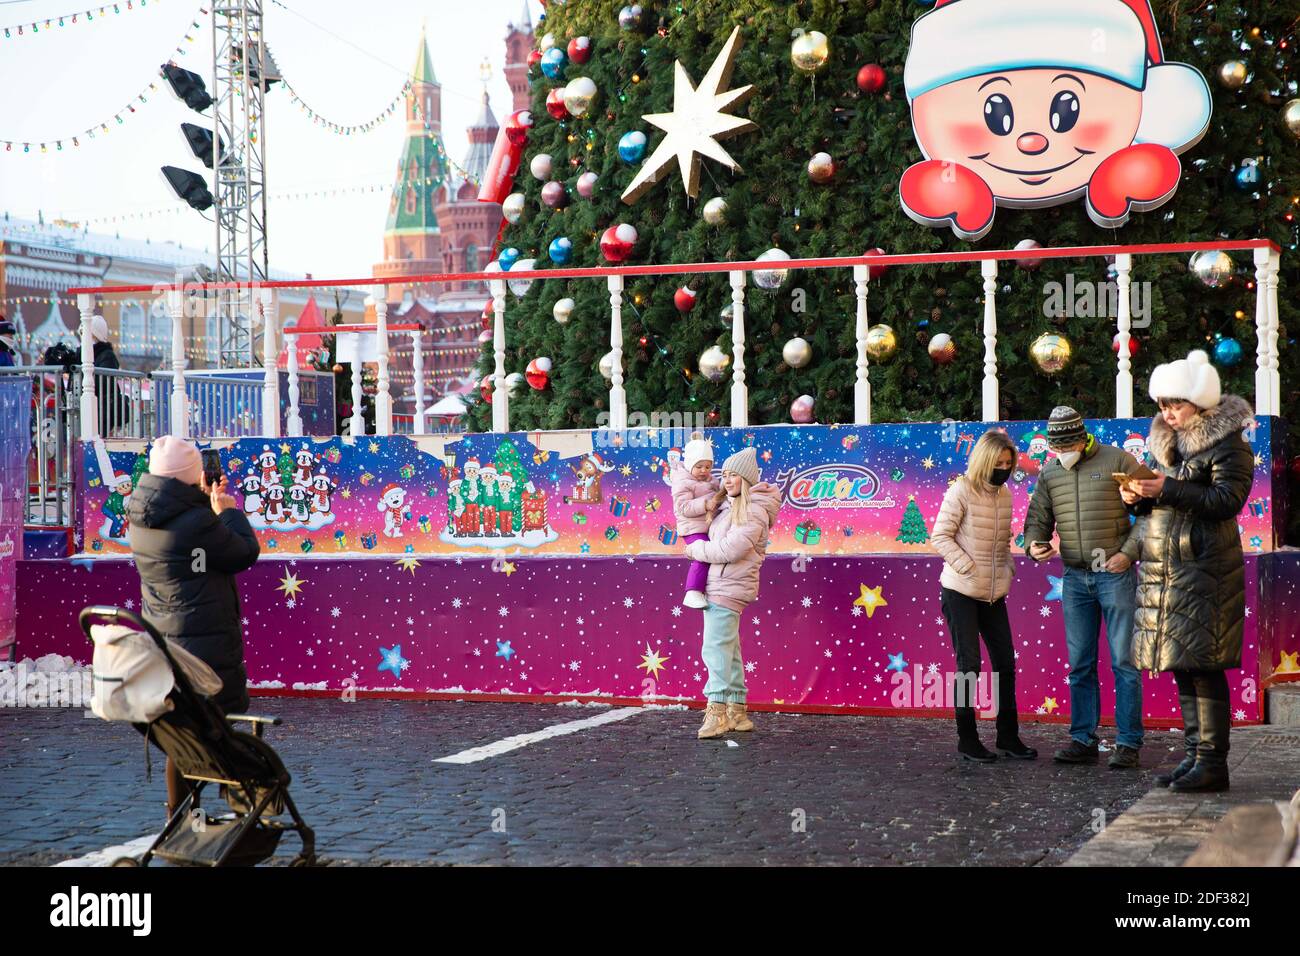 Moscow, Russia. 2nd Dec, 2020. People take photos by a Christmas tree with New Year decorations in Moscow, Russia, on Dec. 2, 2020. Credit: Bai Xueqi/Xinhua/Alamy Live News Stock Photo